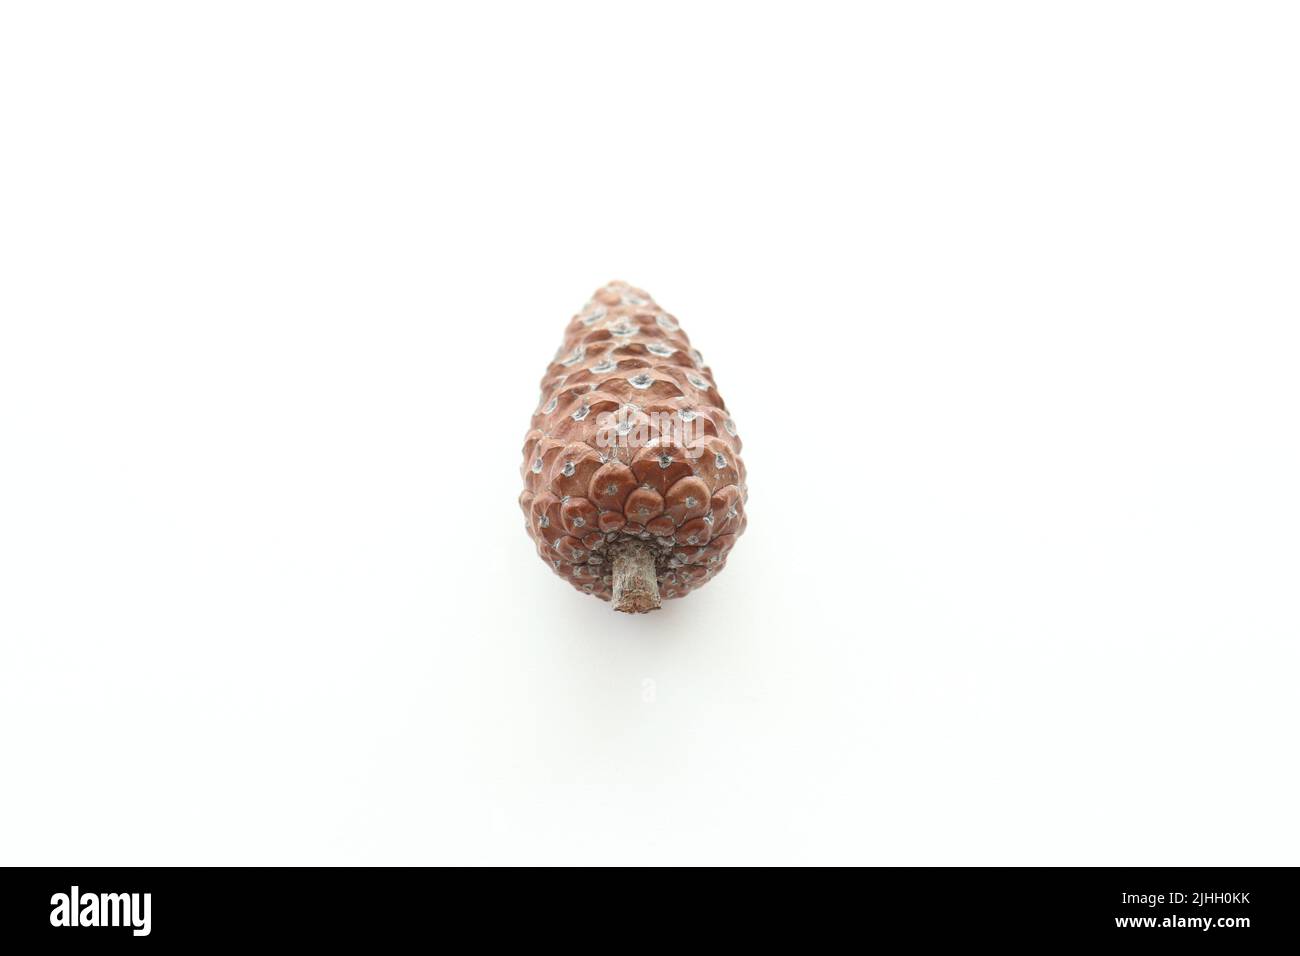 Pine cone in the middle , pine cone is isolated on white background. Copy space. Top view photo. No people, nobody. Tree seed idea concept. Stock Photo